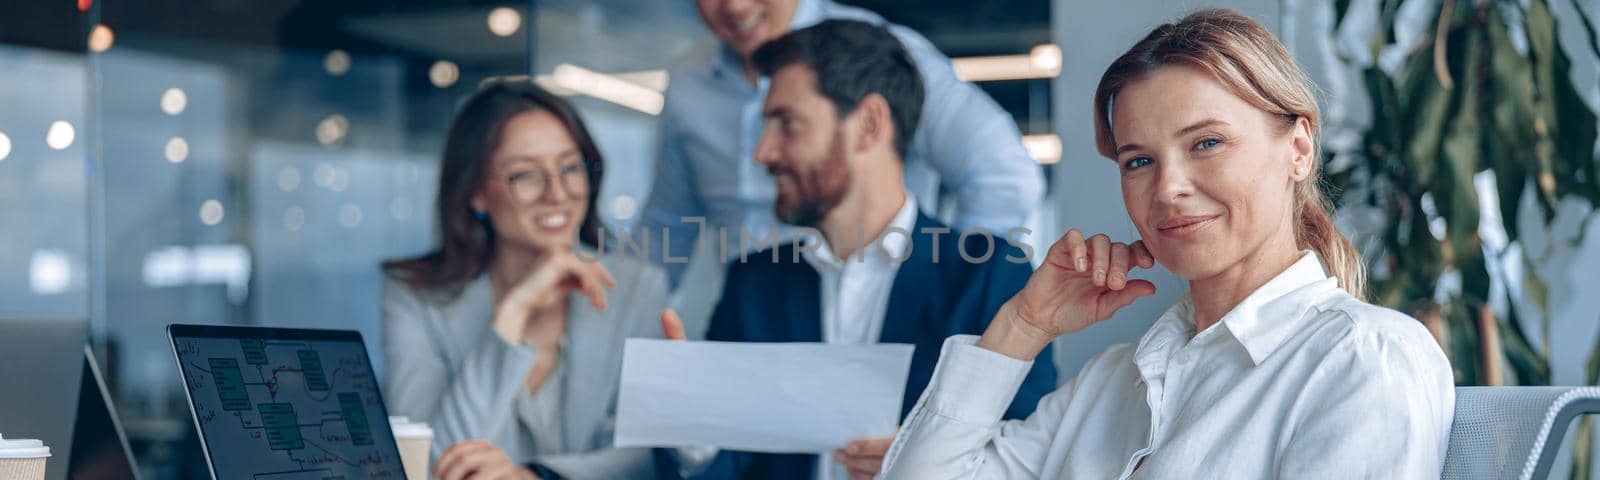 Smiling confident businesswoman sitting on meeting in office with her colleagues at background.